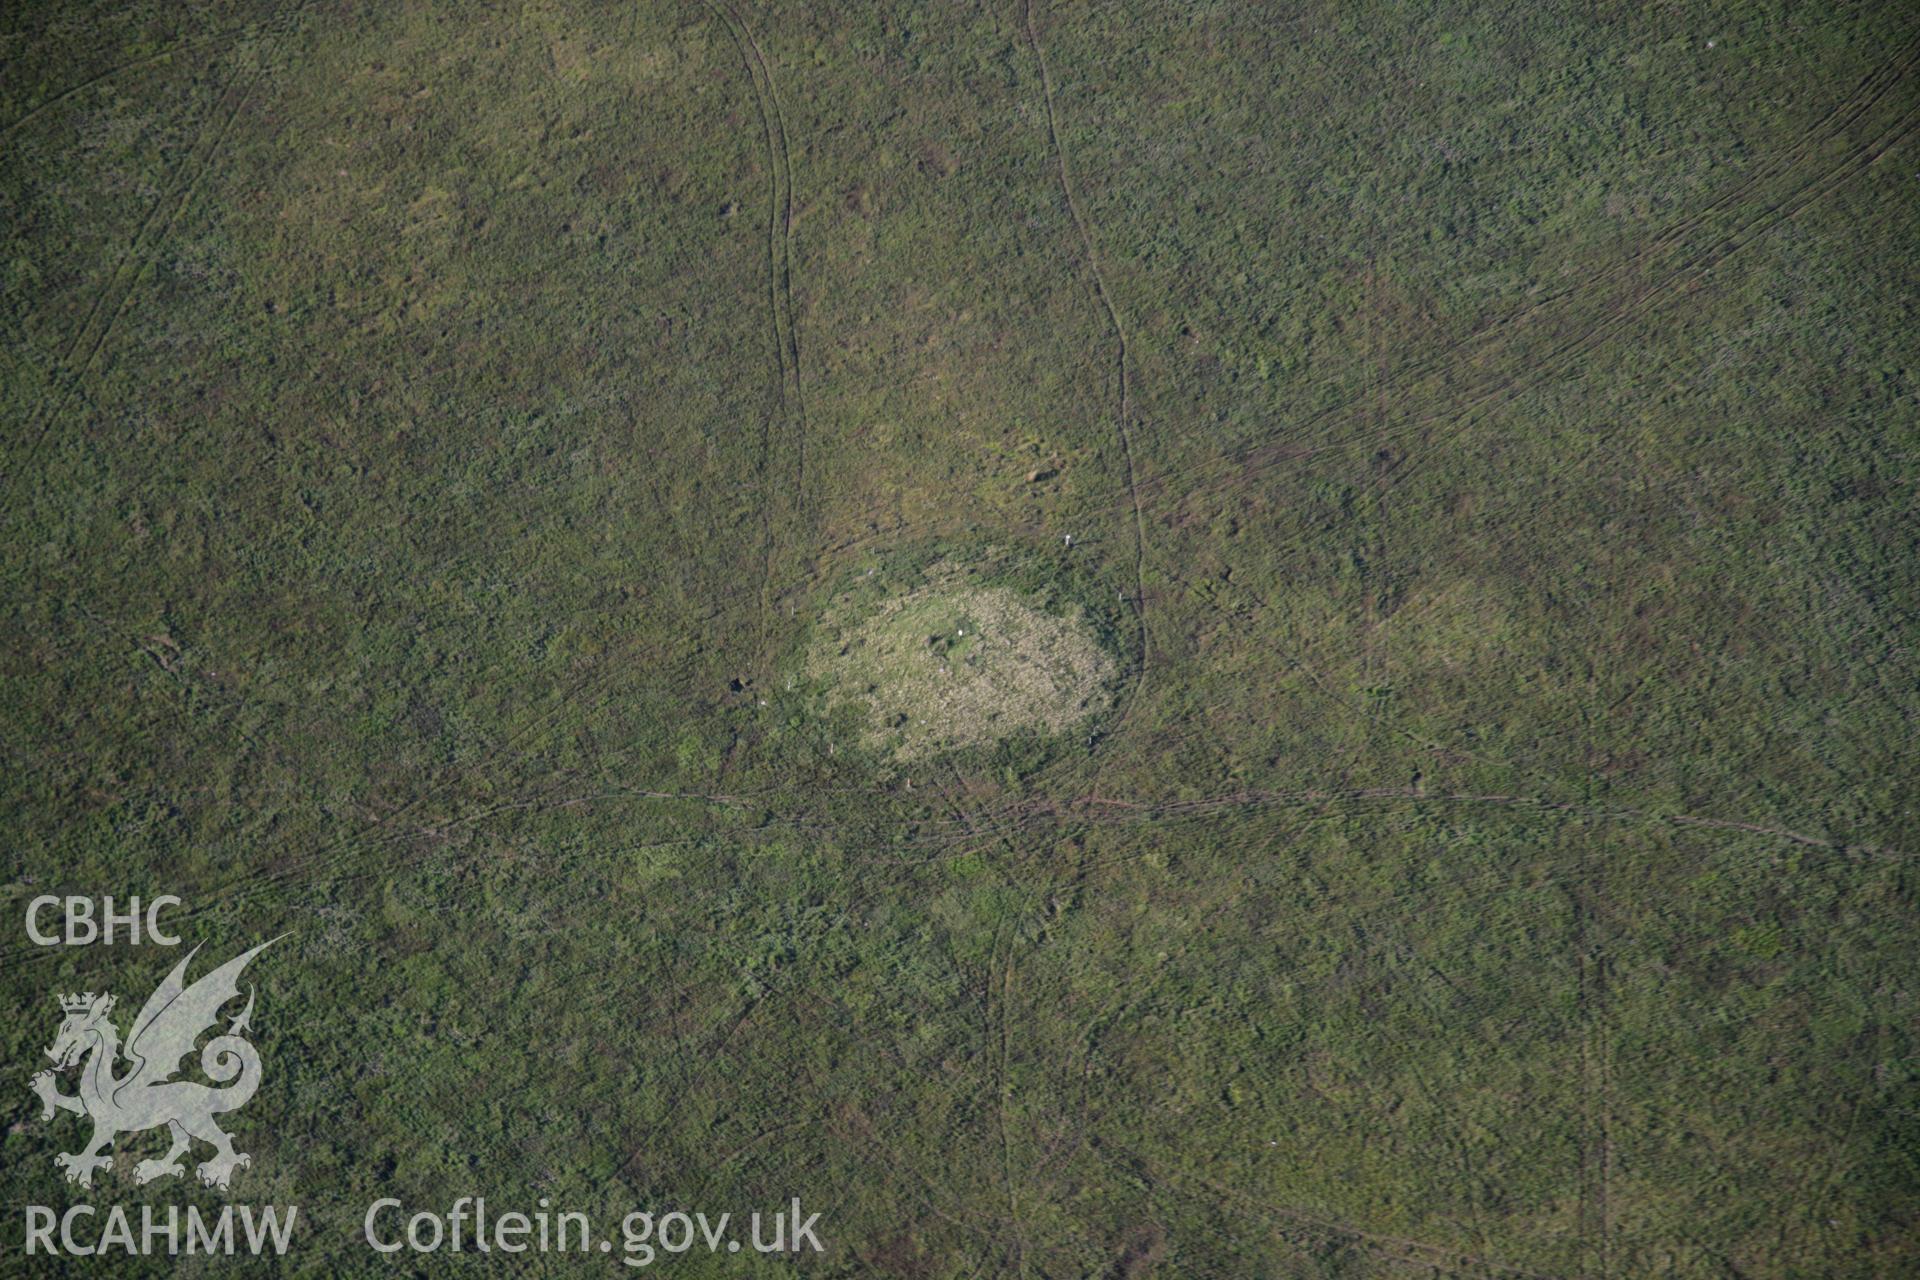 RCAHMW colour oblique aerial photograph of Bryn Melin Cairn, Llandeilor Fan. Taken on 08 August 2007 by Toby Driver